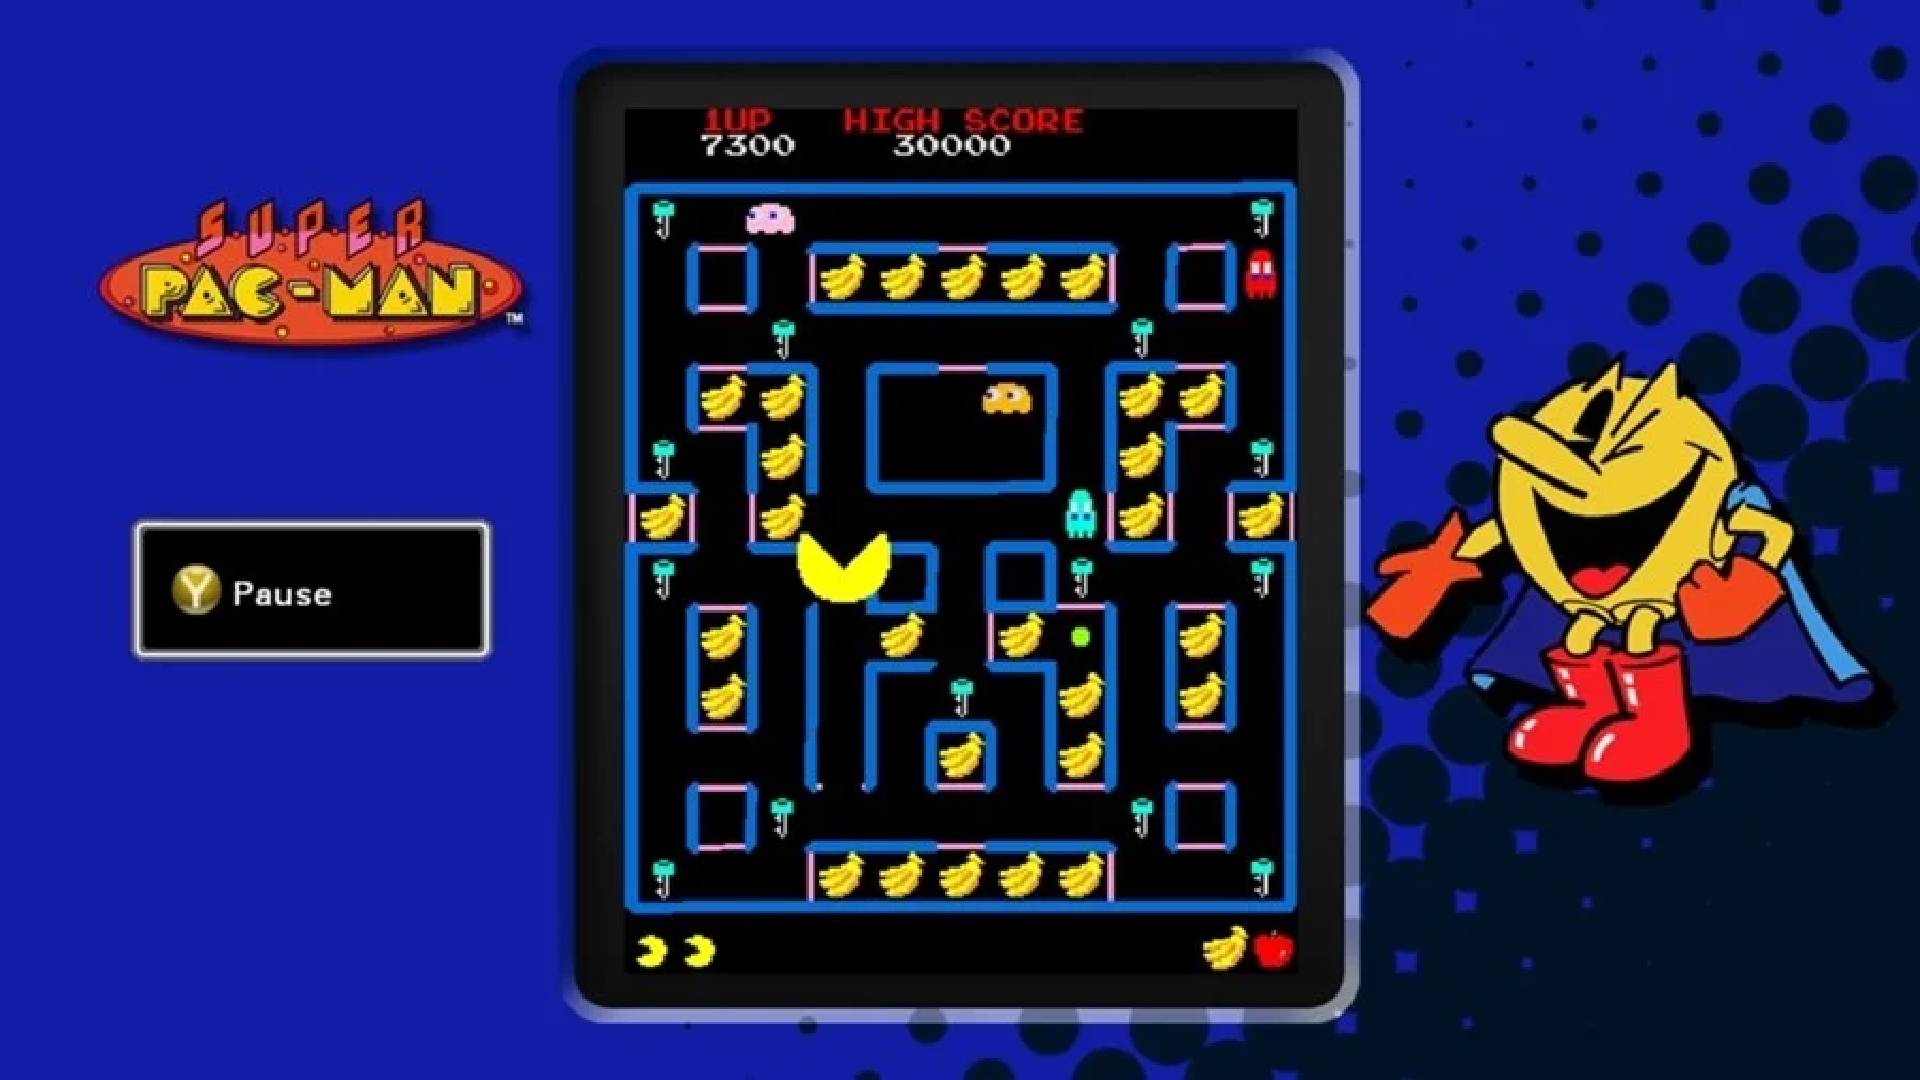 UNBELIEVABLE! Nintendo Is Shutting Down Pac-Man 99 On The Switch